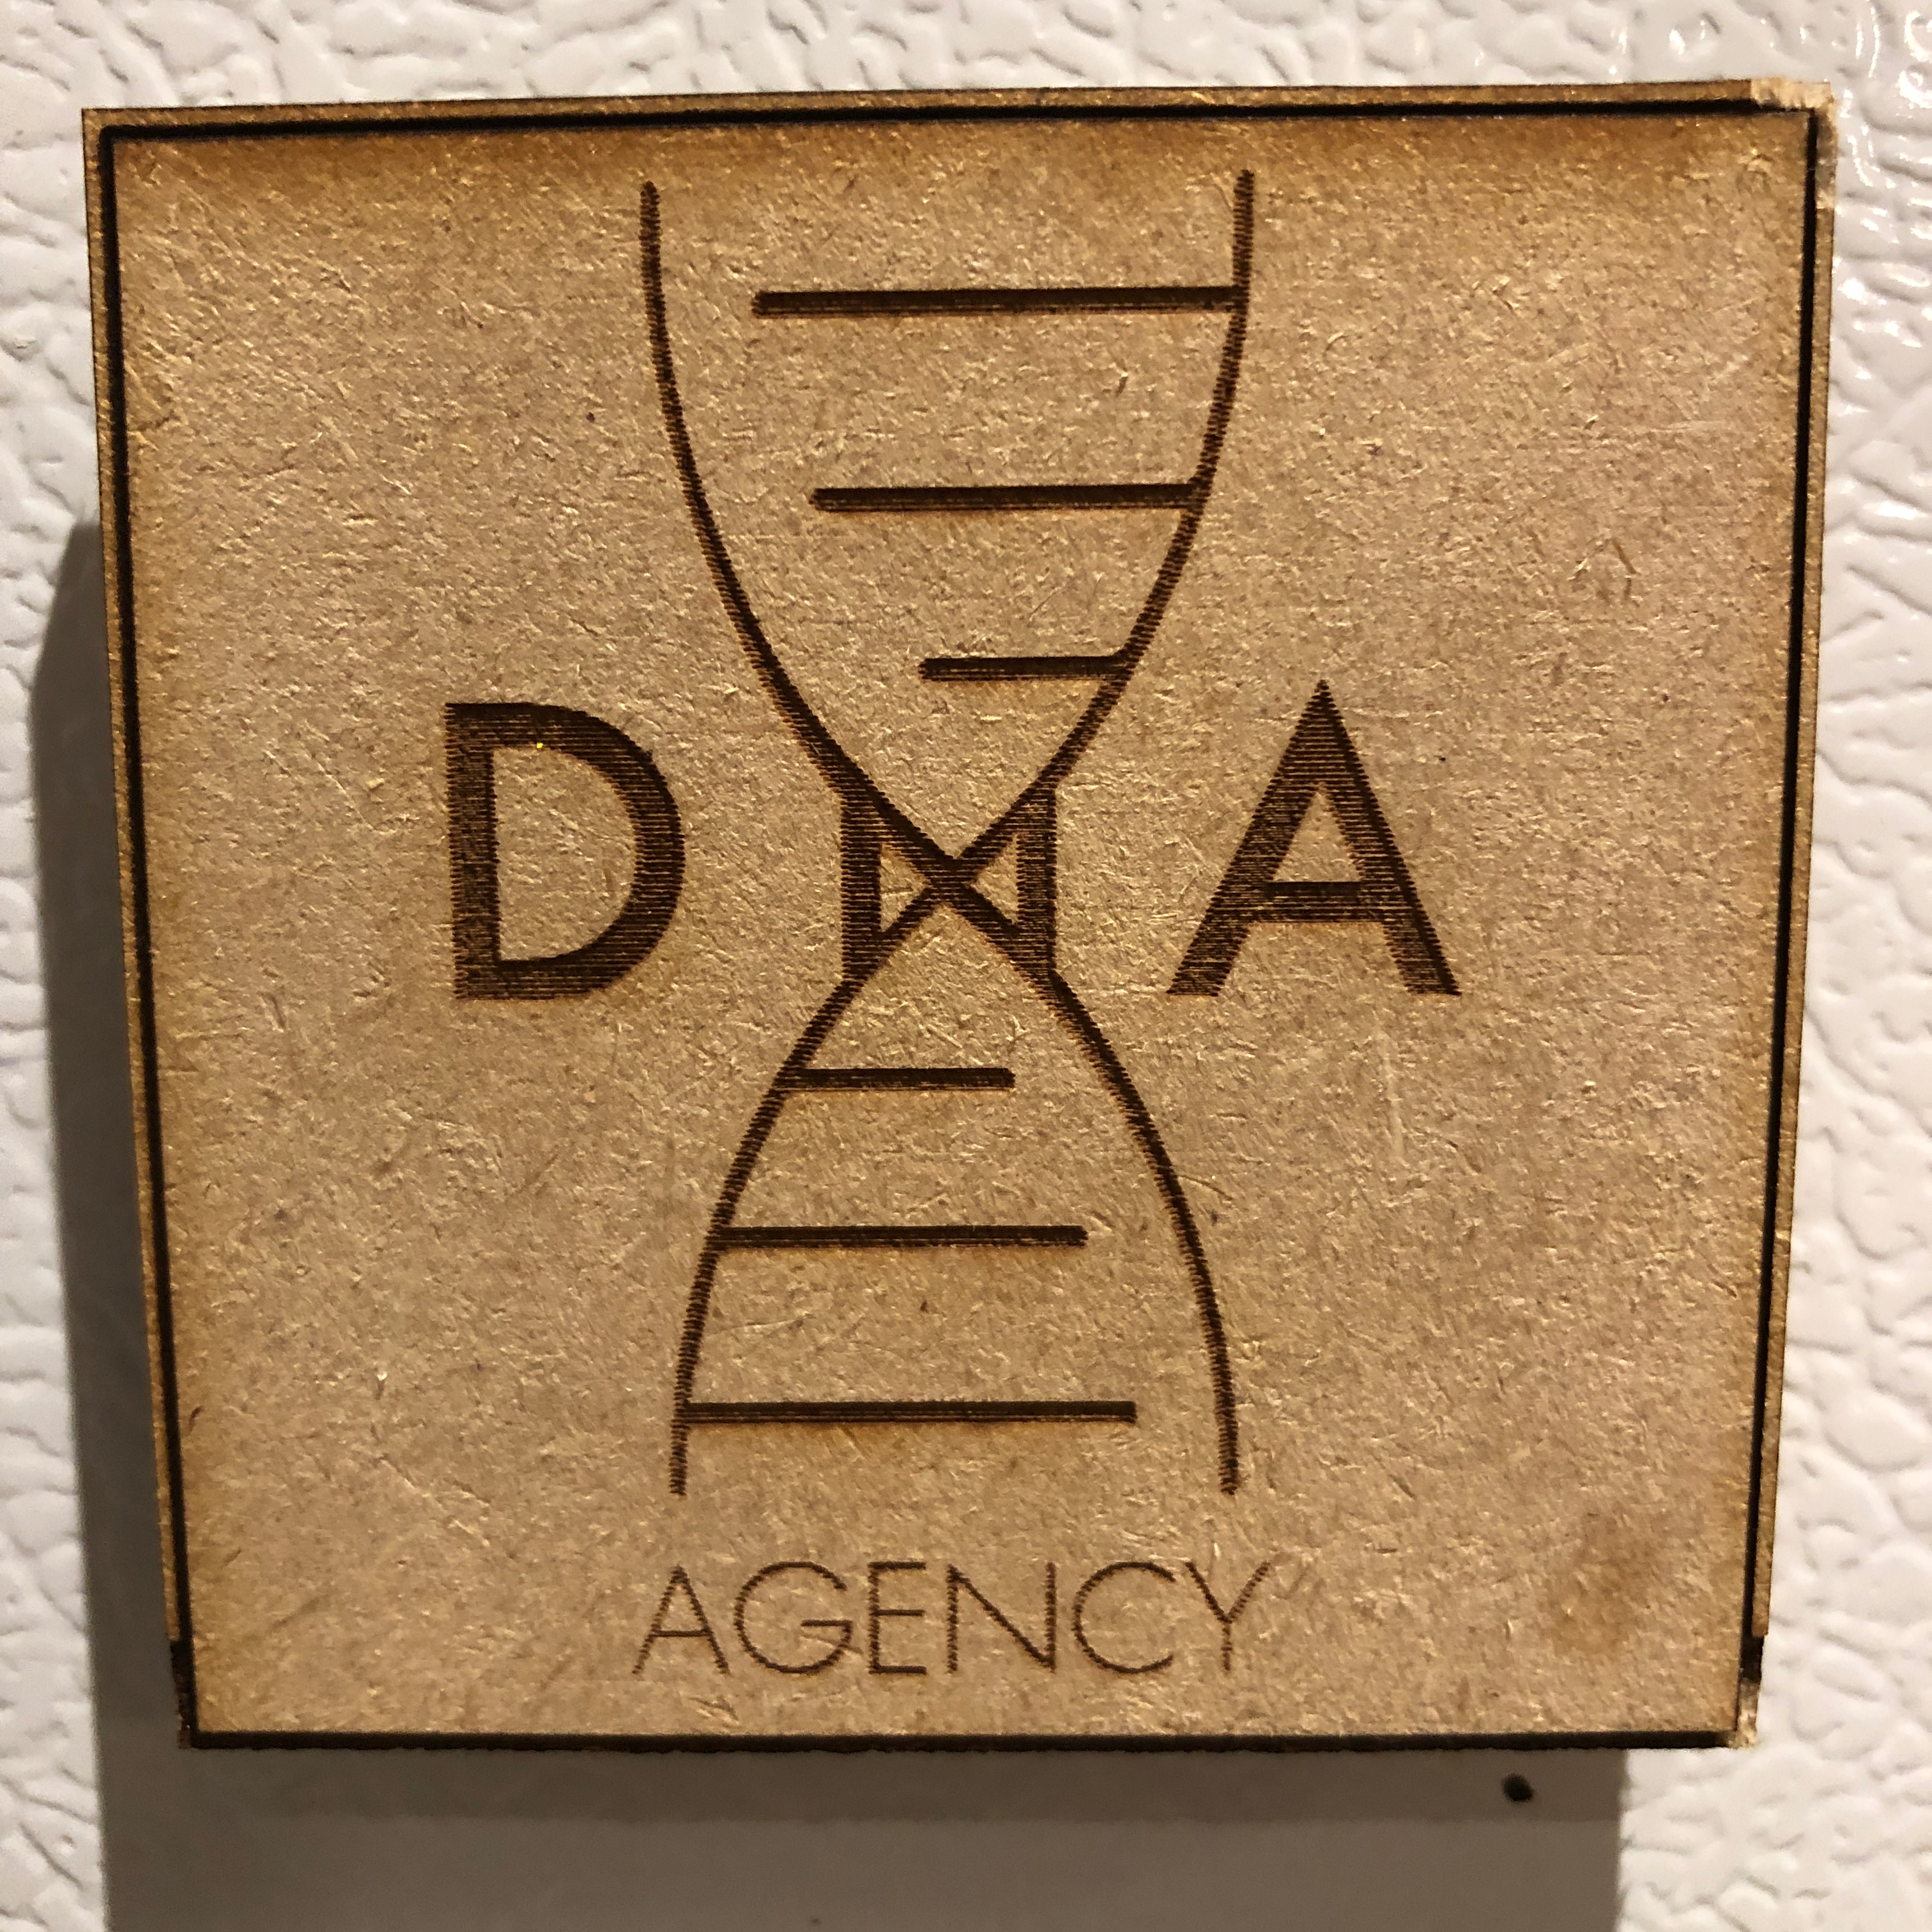 Custom brand magnets laser-cut with corporate logo for DNA Agency.